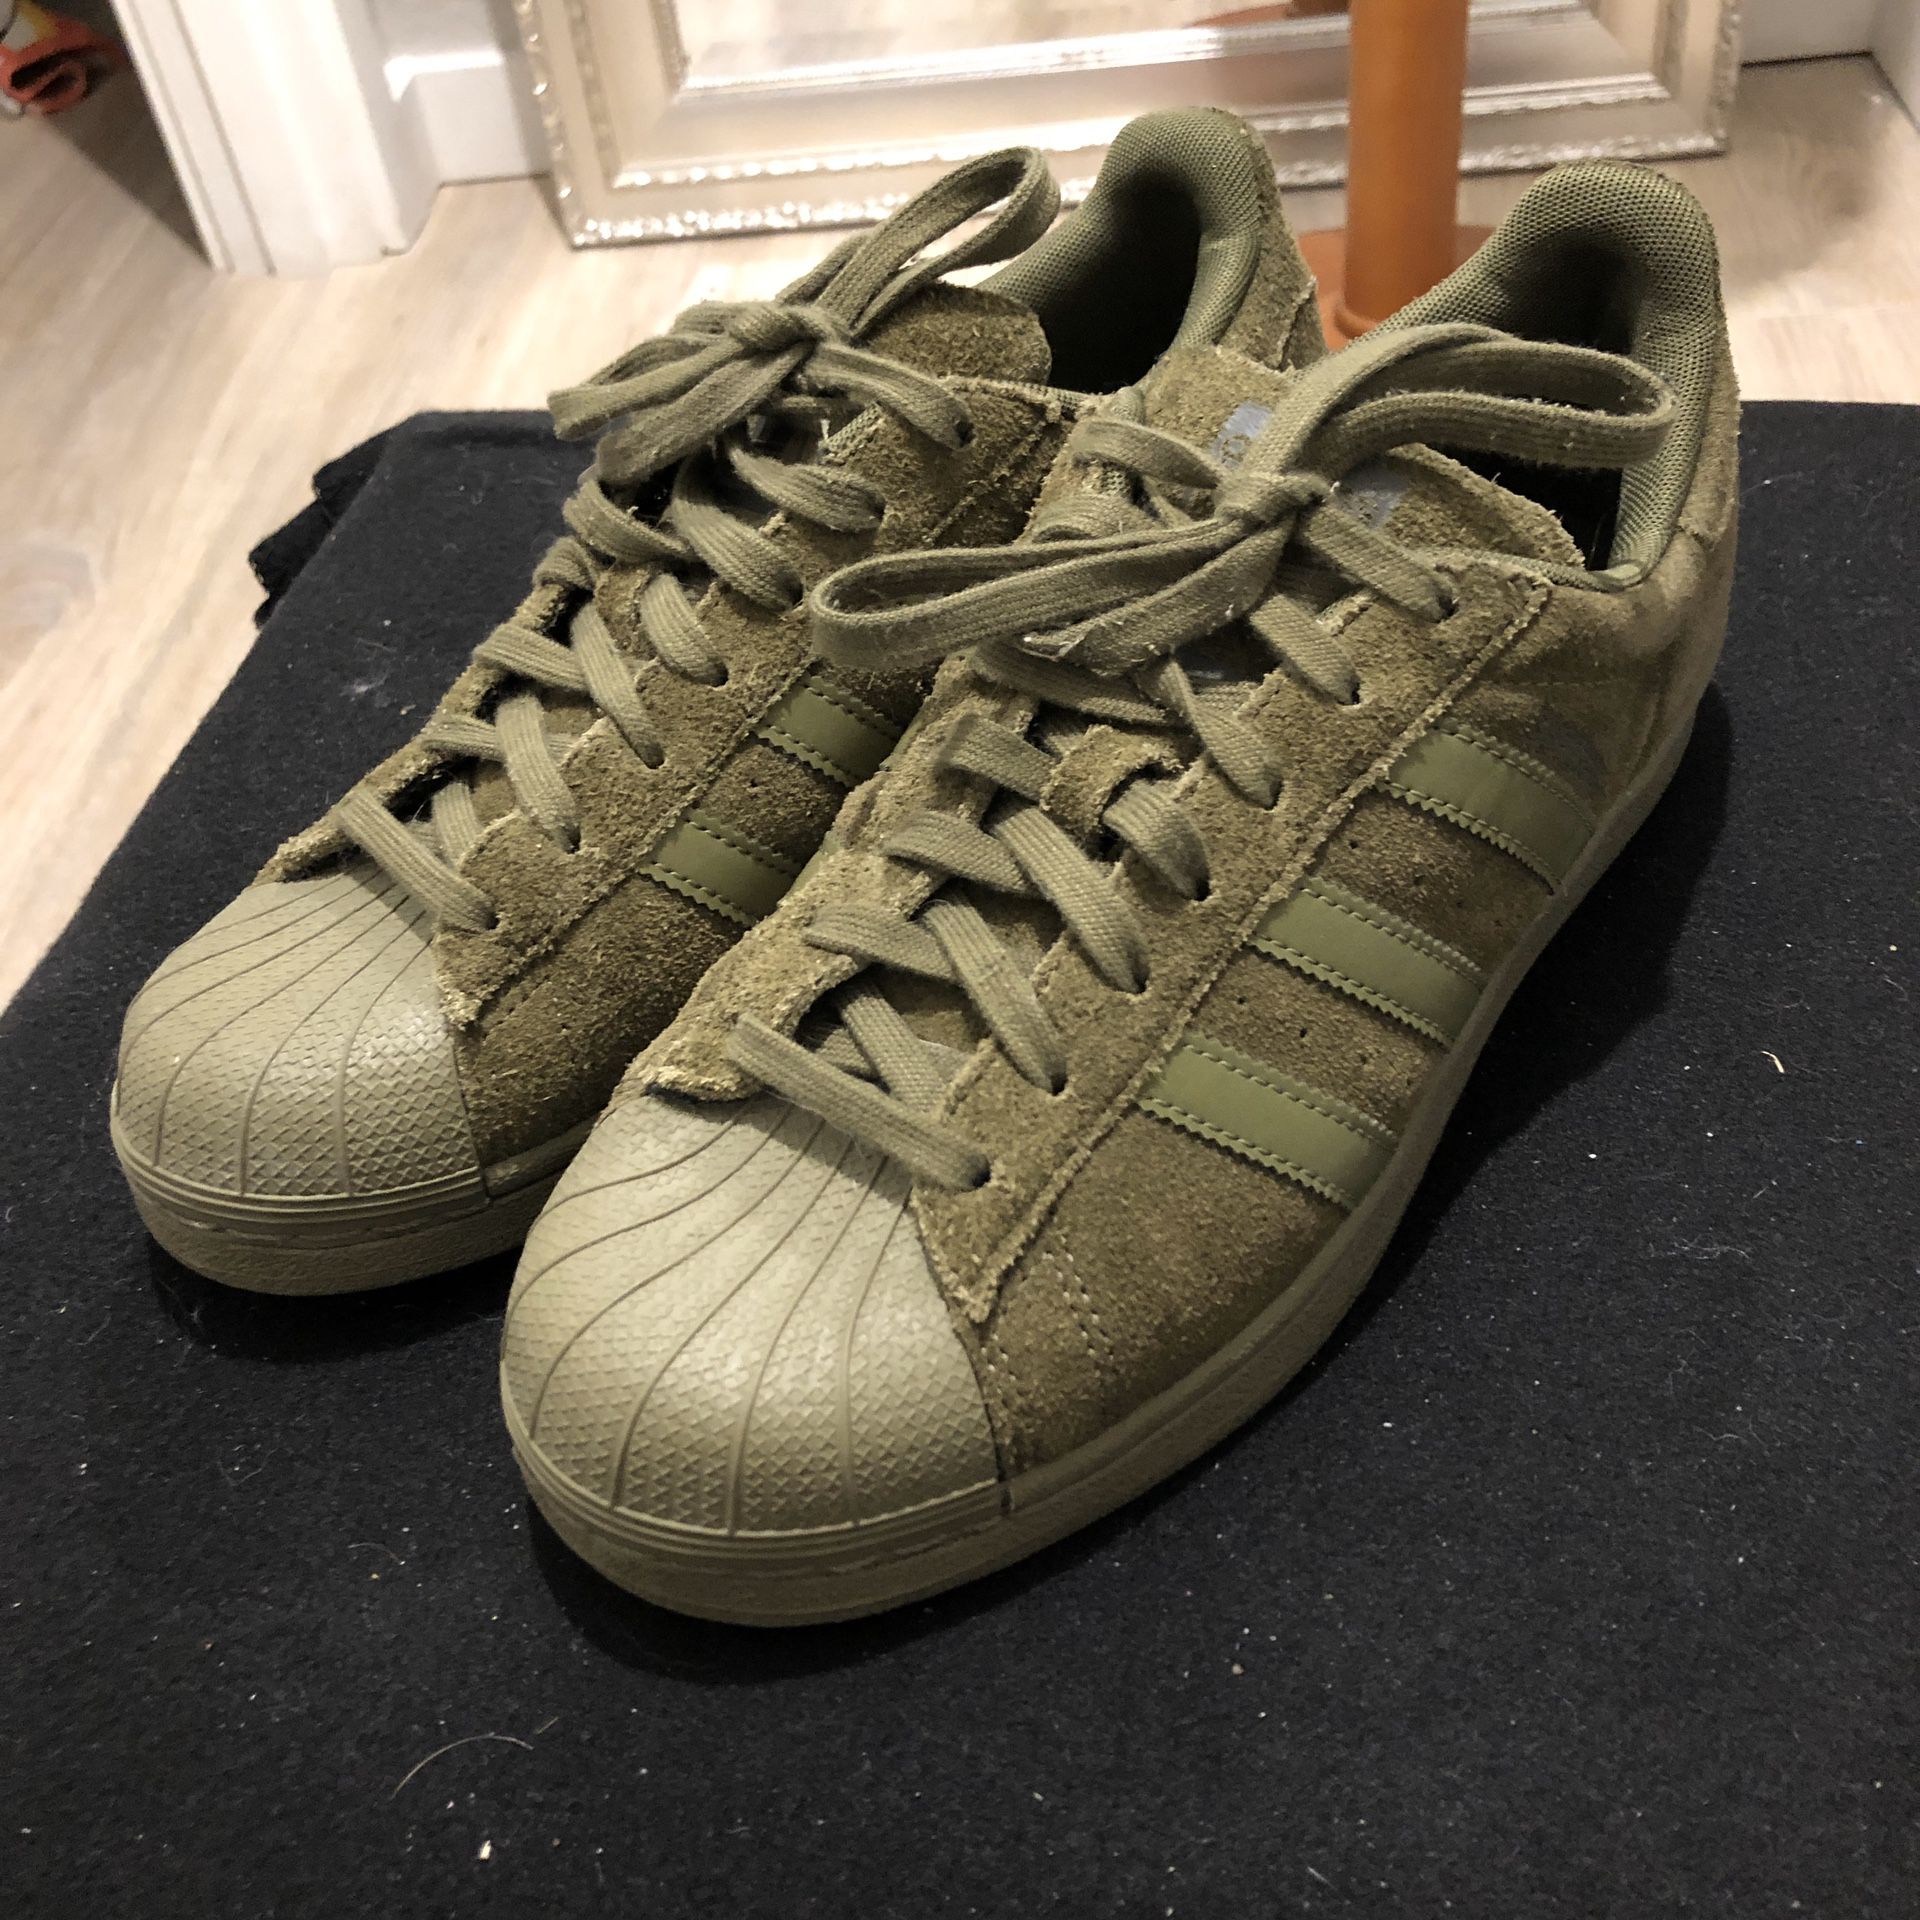 🔥CAMO GREEN ALL SUEDE ADIDAS SUPERSTAR SHELL TOES🔥